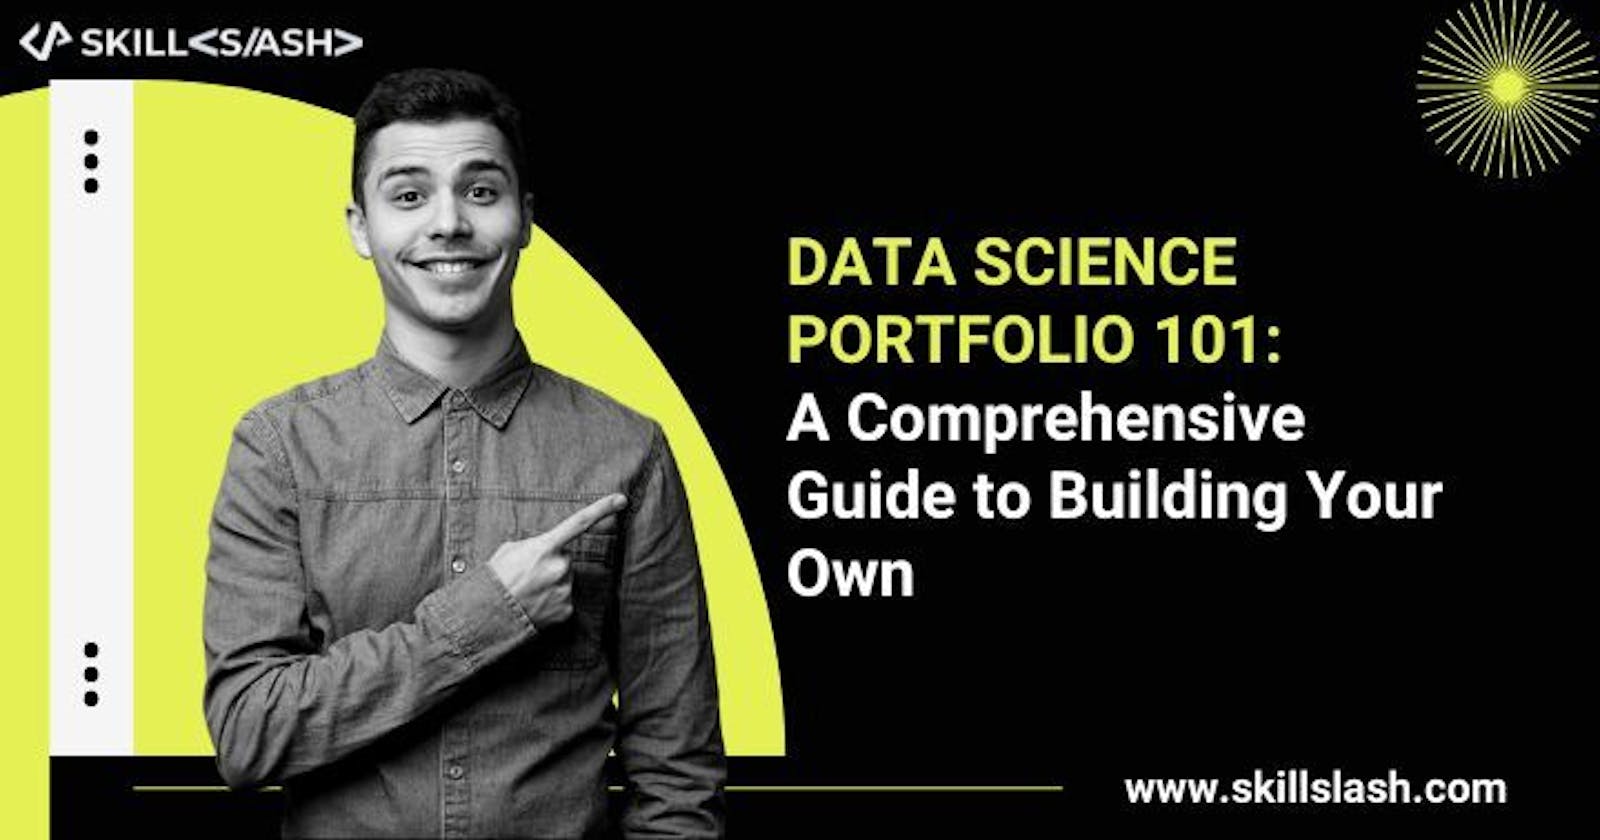 Data Science Portfolio 101: A Comprehensive Guide to Building Your Own